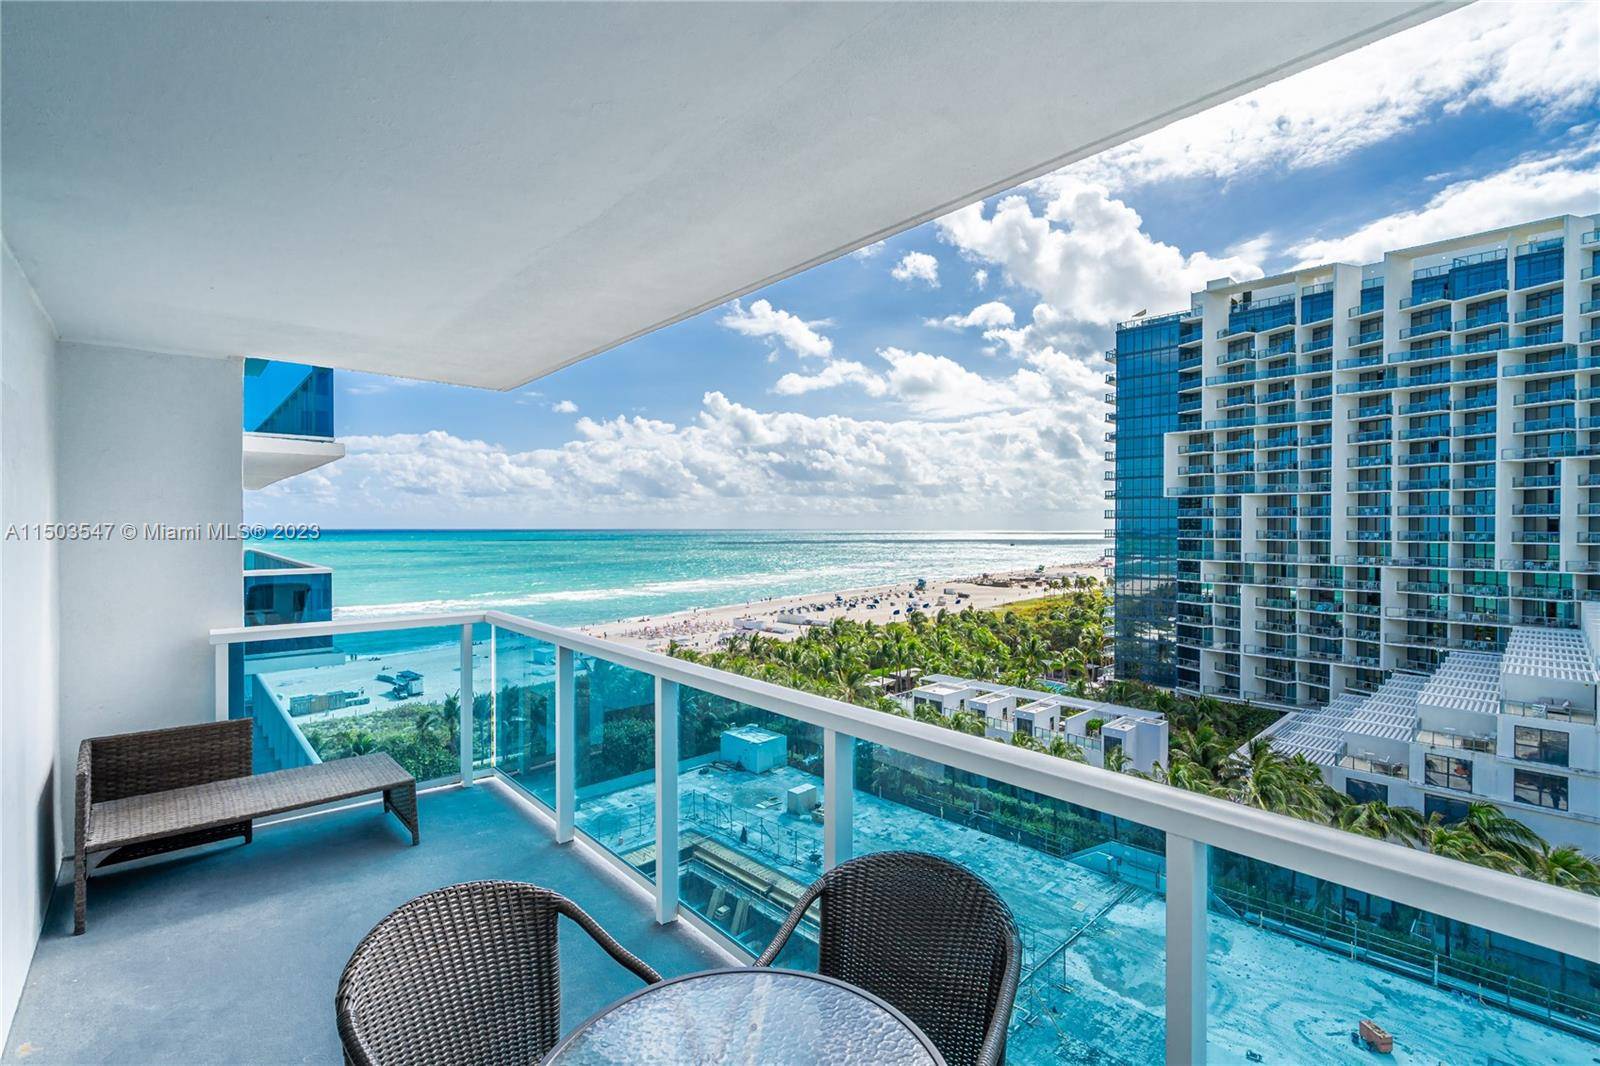 Experience the ultimate in beachfront luxury with this 2 bedroom, 2 bathroom condominium nestled within the renowned Roney Palace and the 1 Hotel.